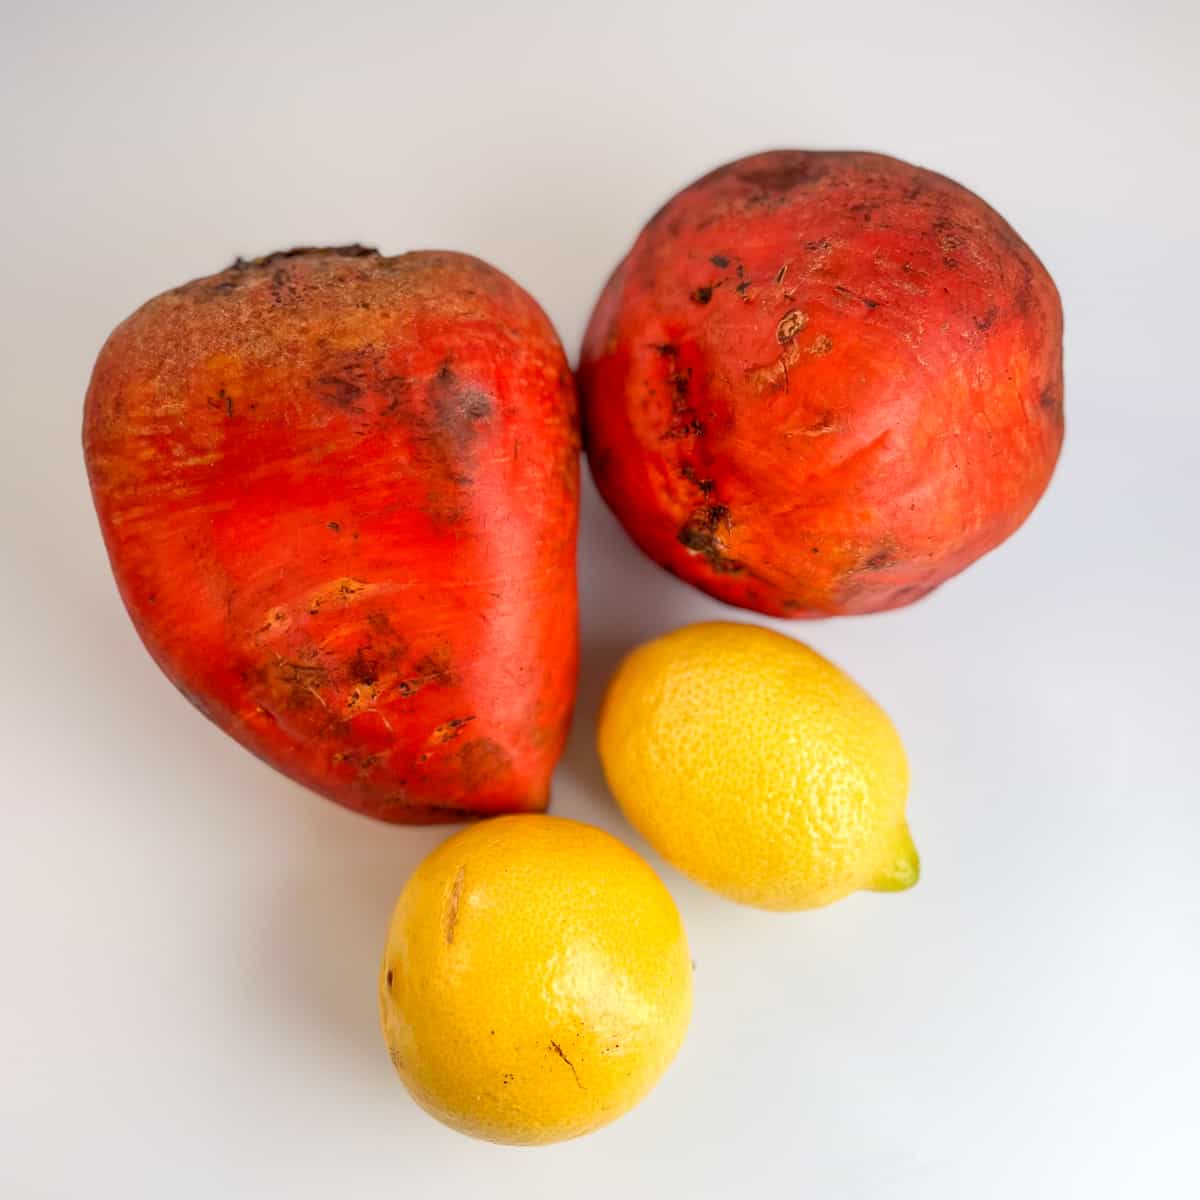 Two golden beets and two lemons.